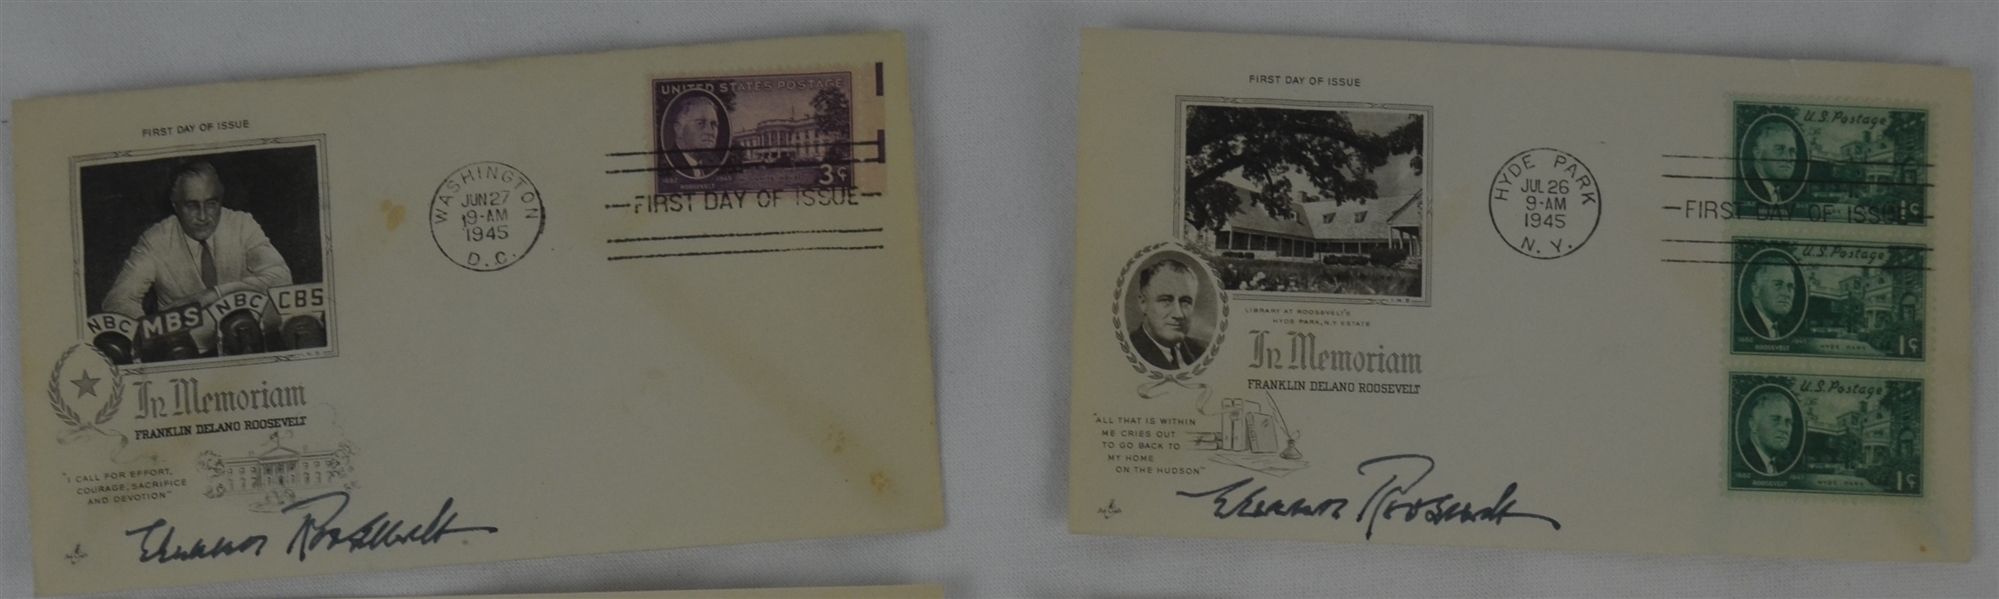 Eleanor Roosevelt Lot of 2 Signed 1945 First Day Covers